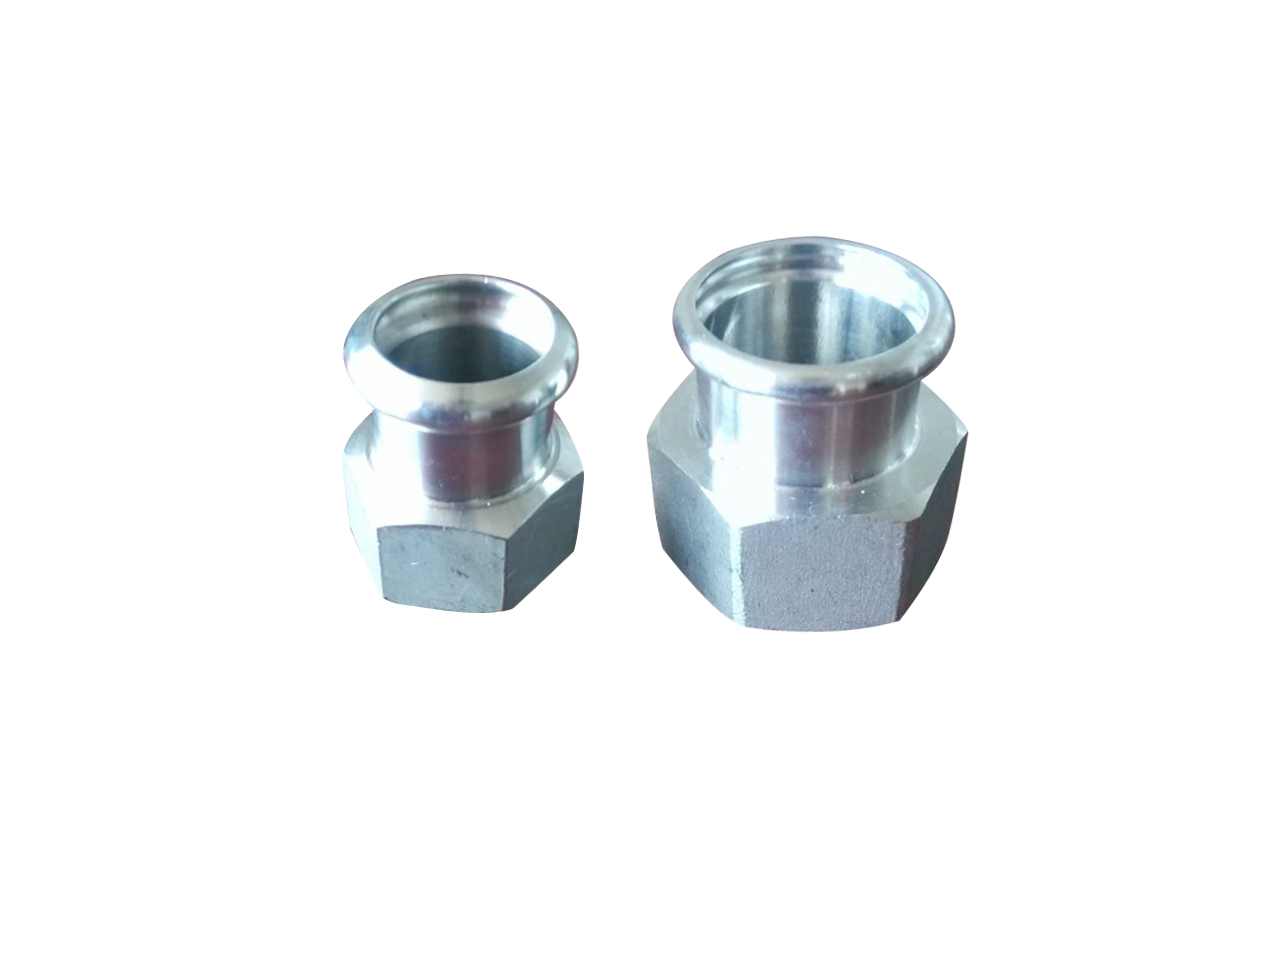 Stainless steel press-fittings